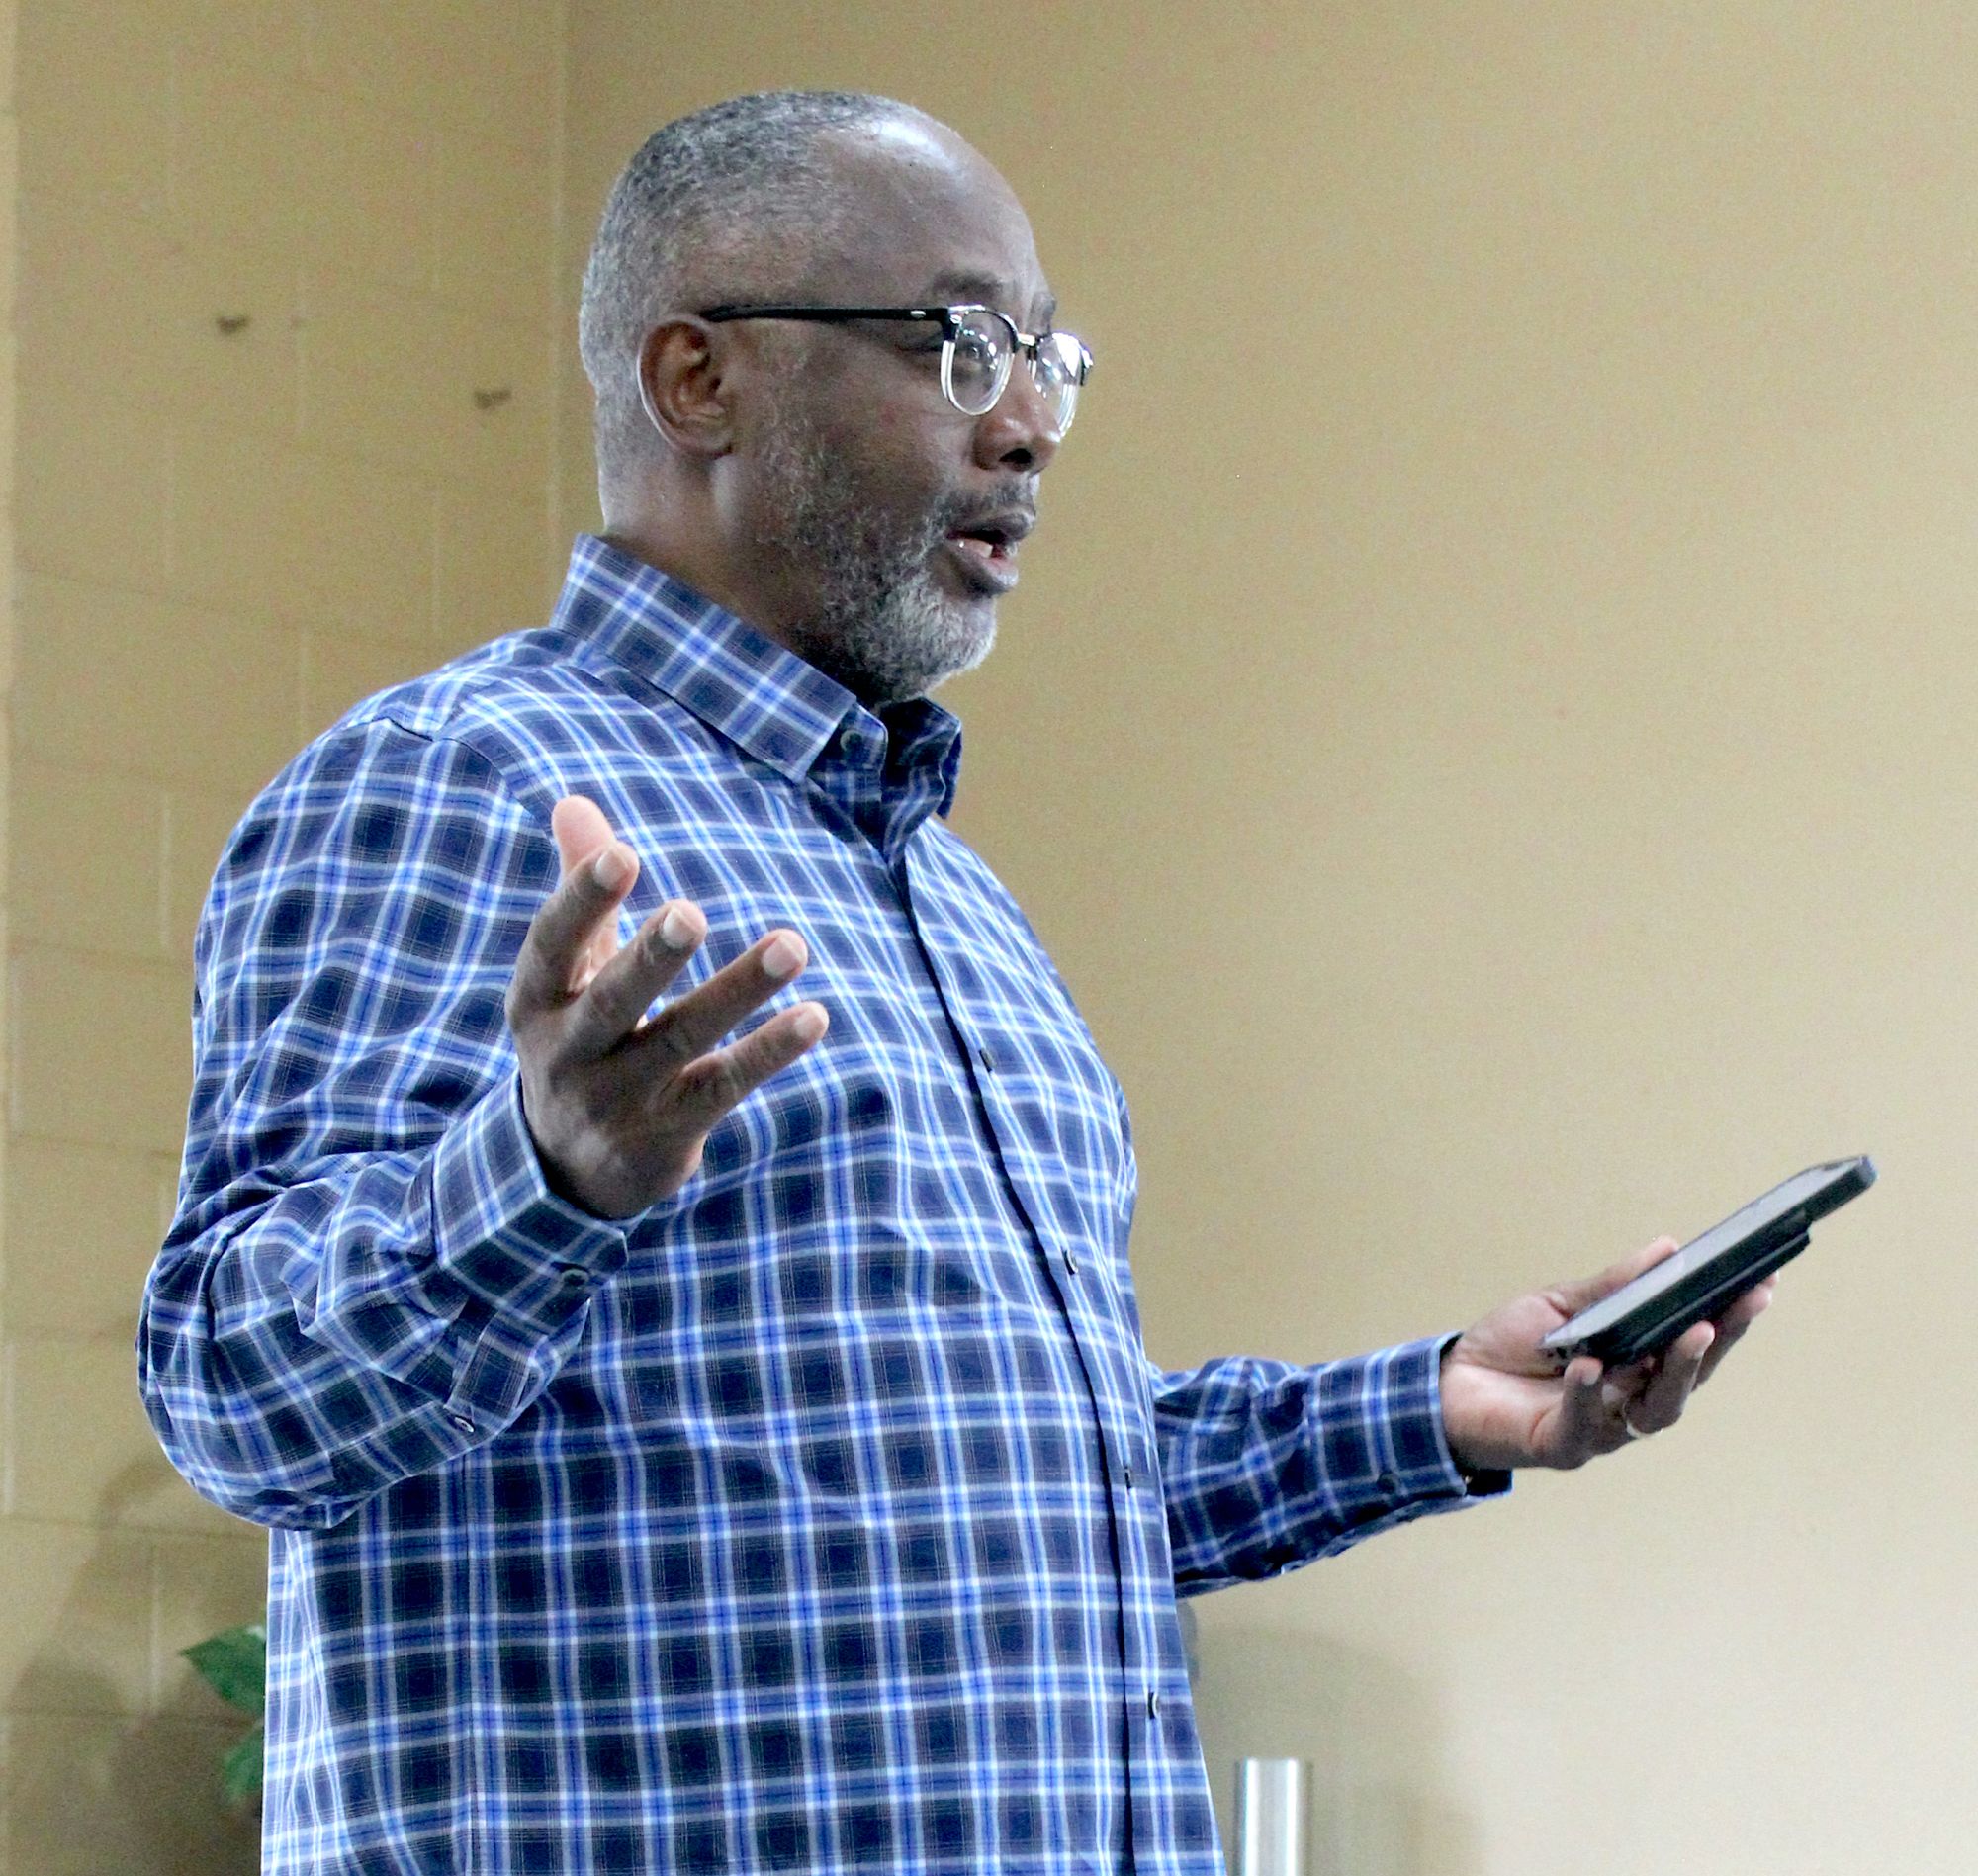 The photo is of a Black man with short, graying hair and glasses who is gesturing while holding his phone. He is wearing a long-sleeved, blue plaid shirt.